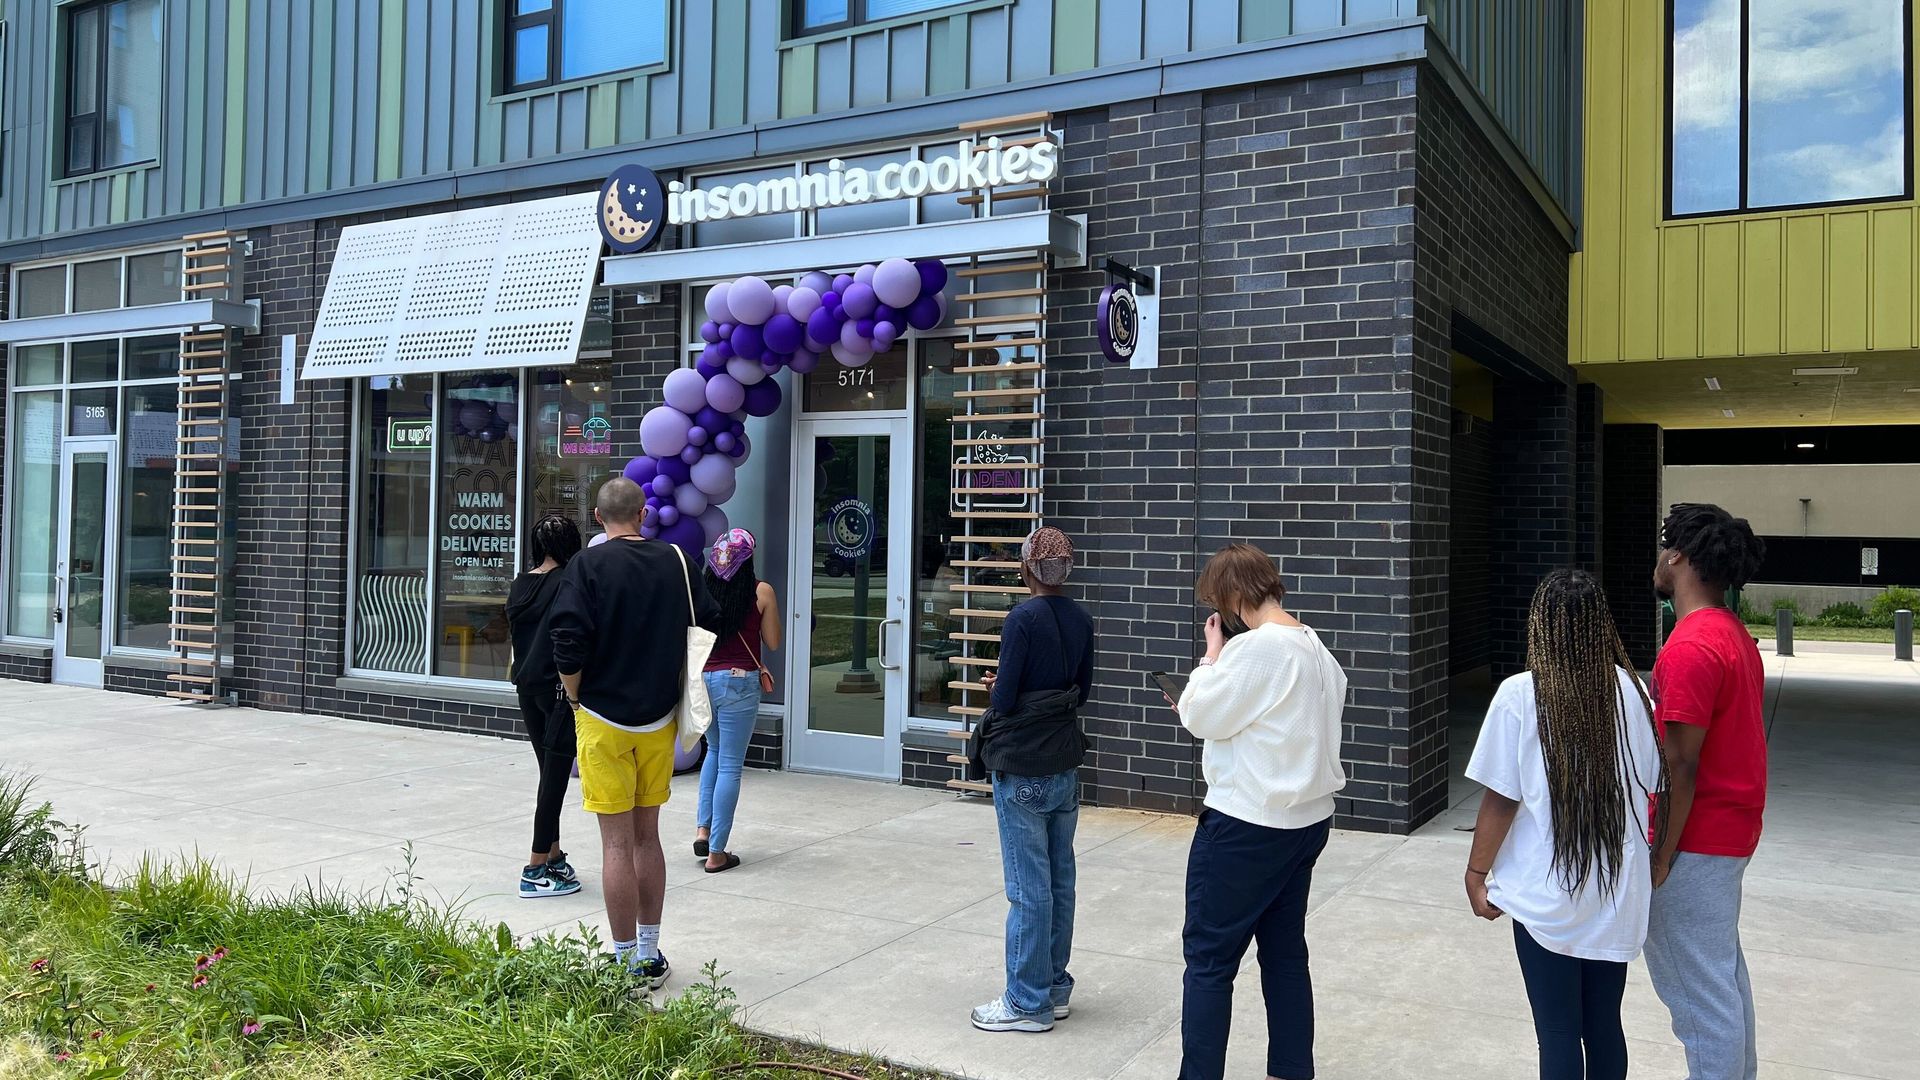 People wait in line outside the storefront for Insomnia Cookies, which is decorated with balloons.